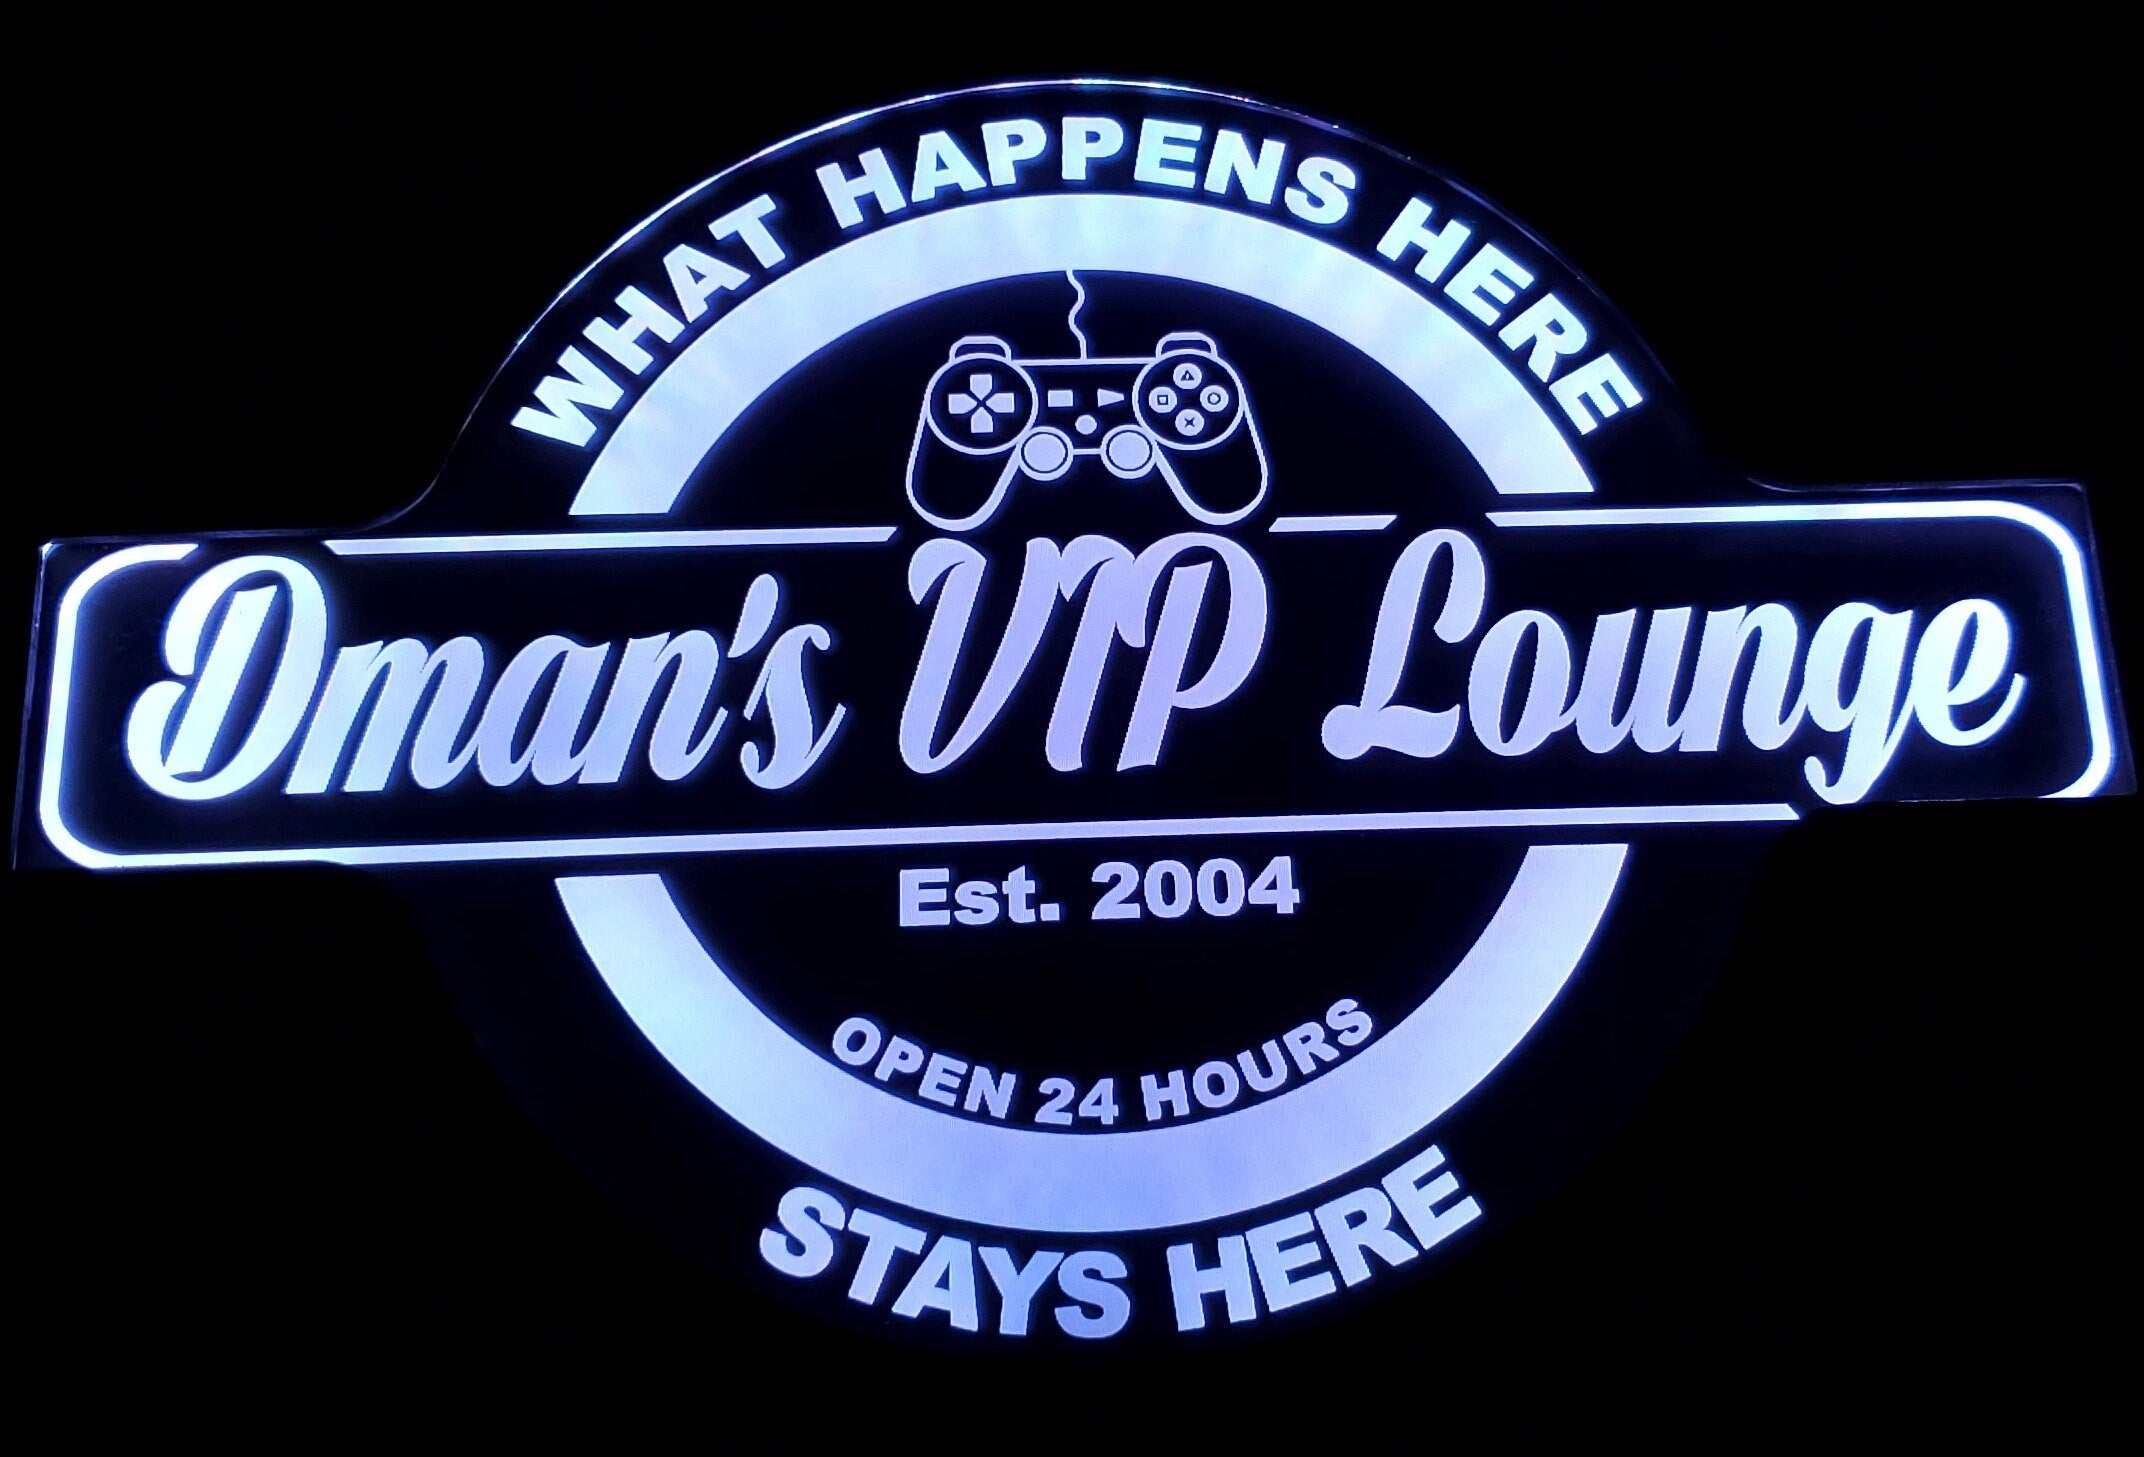 Custom Lounge or Bar Led Wall Sign Neon Like - Color Changing Remote Control - 4 Sizes Free Shipping